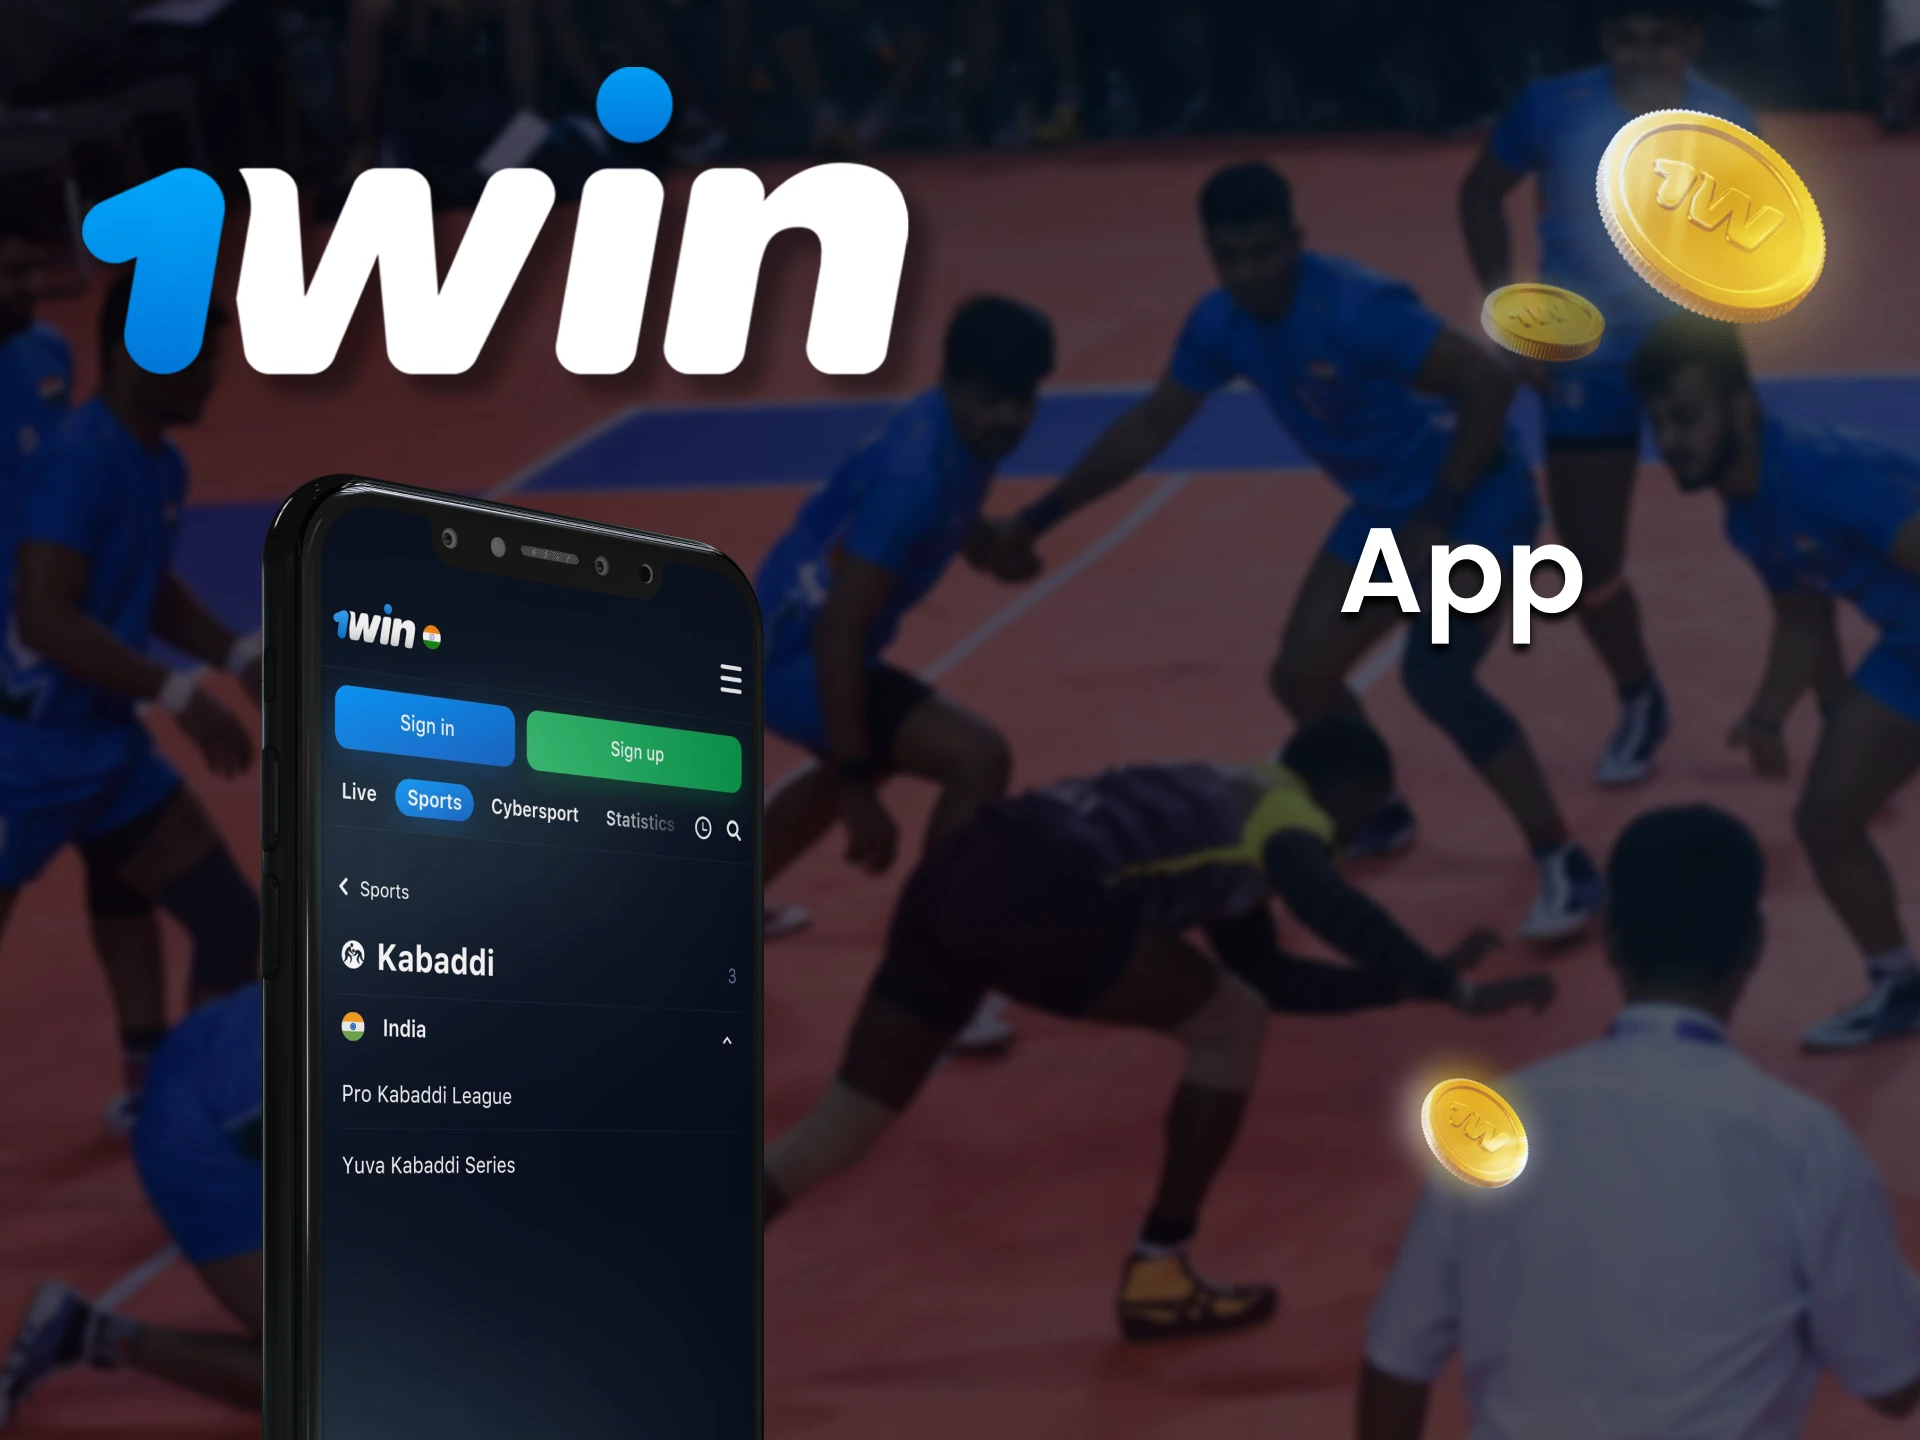 You can place bets on Kabaddi through 1Win app for Android or iOS.